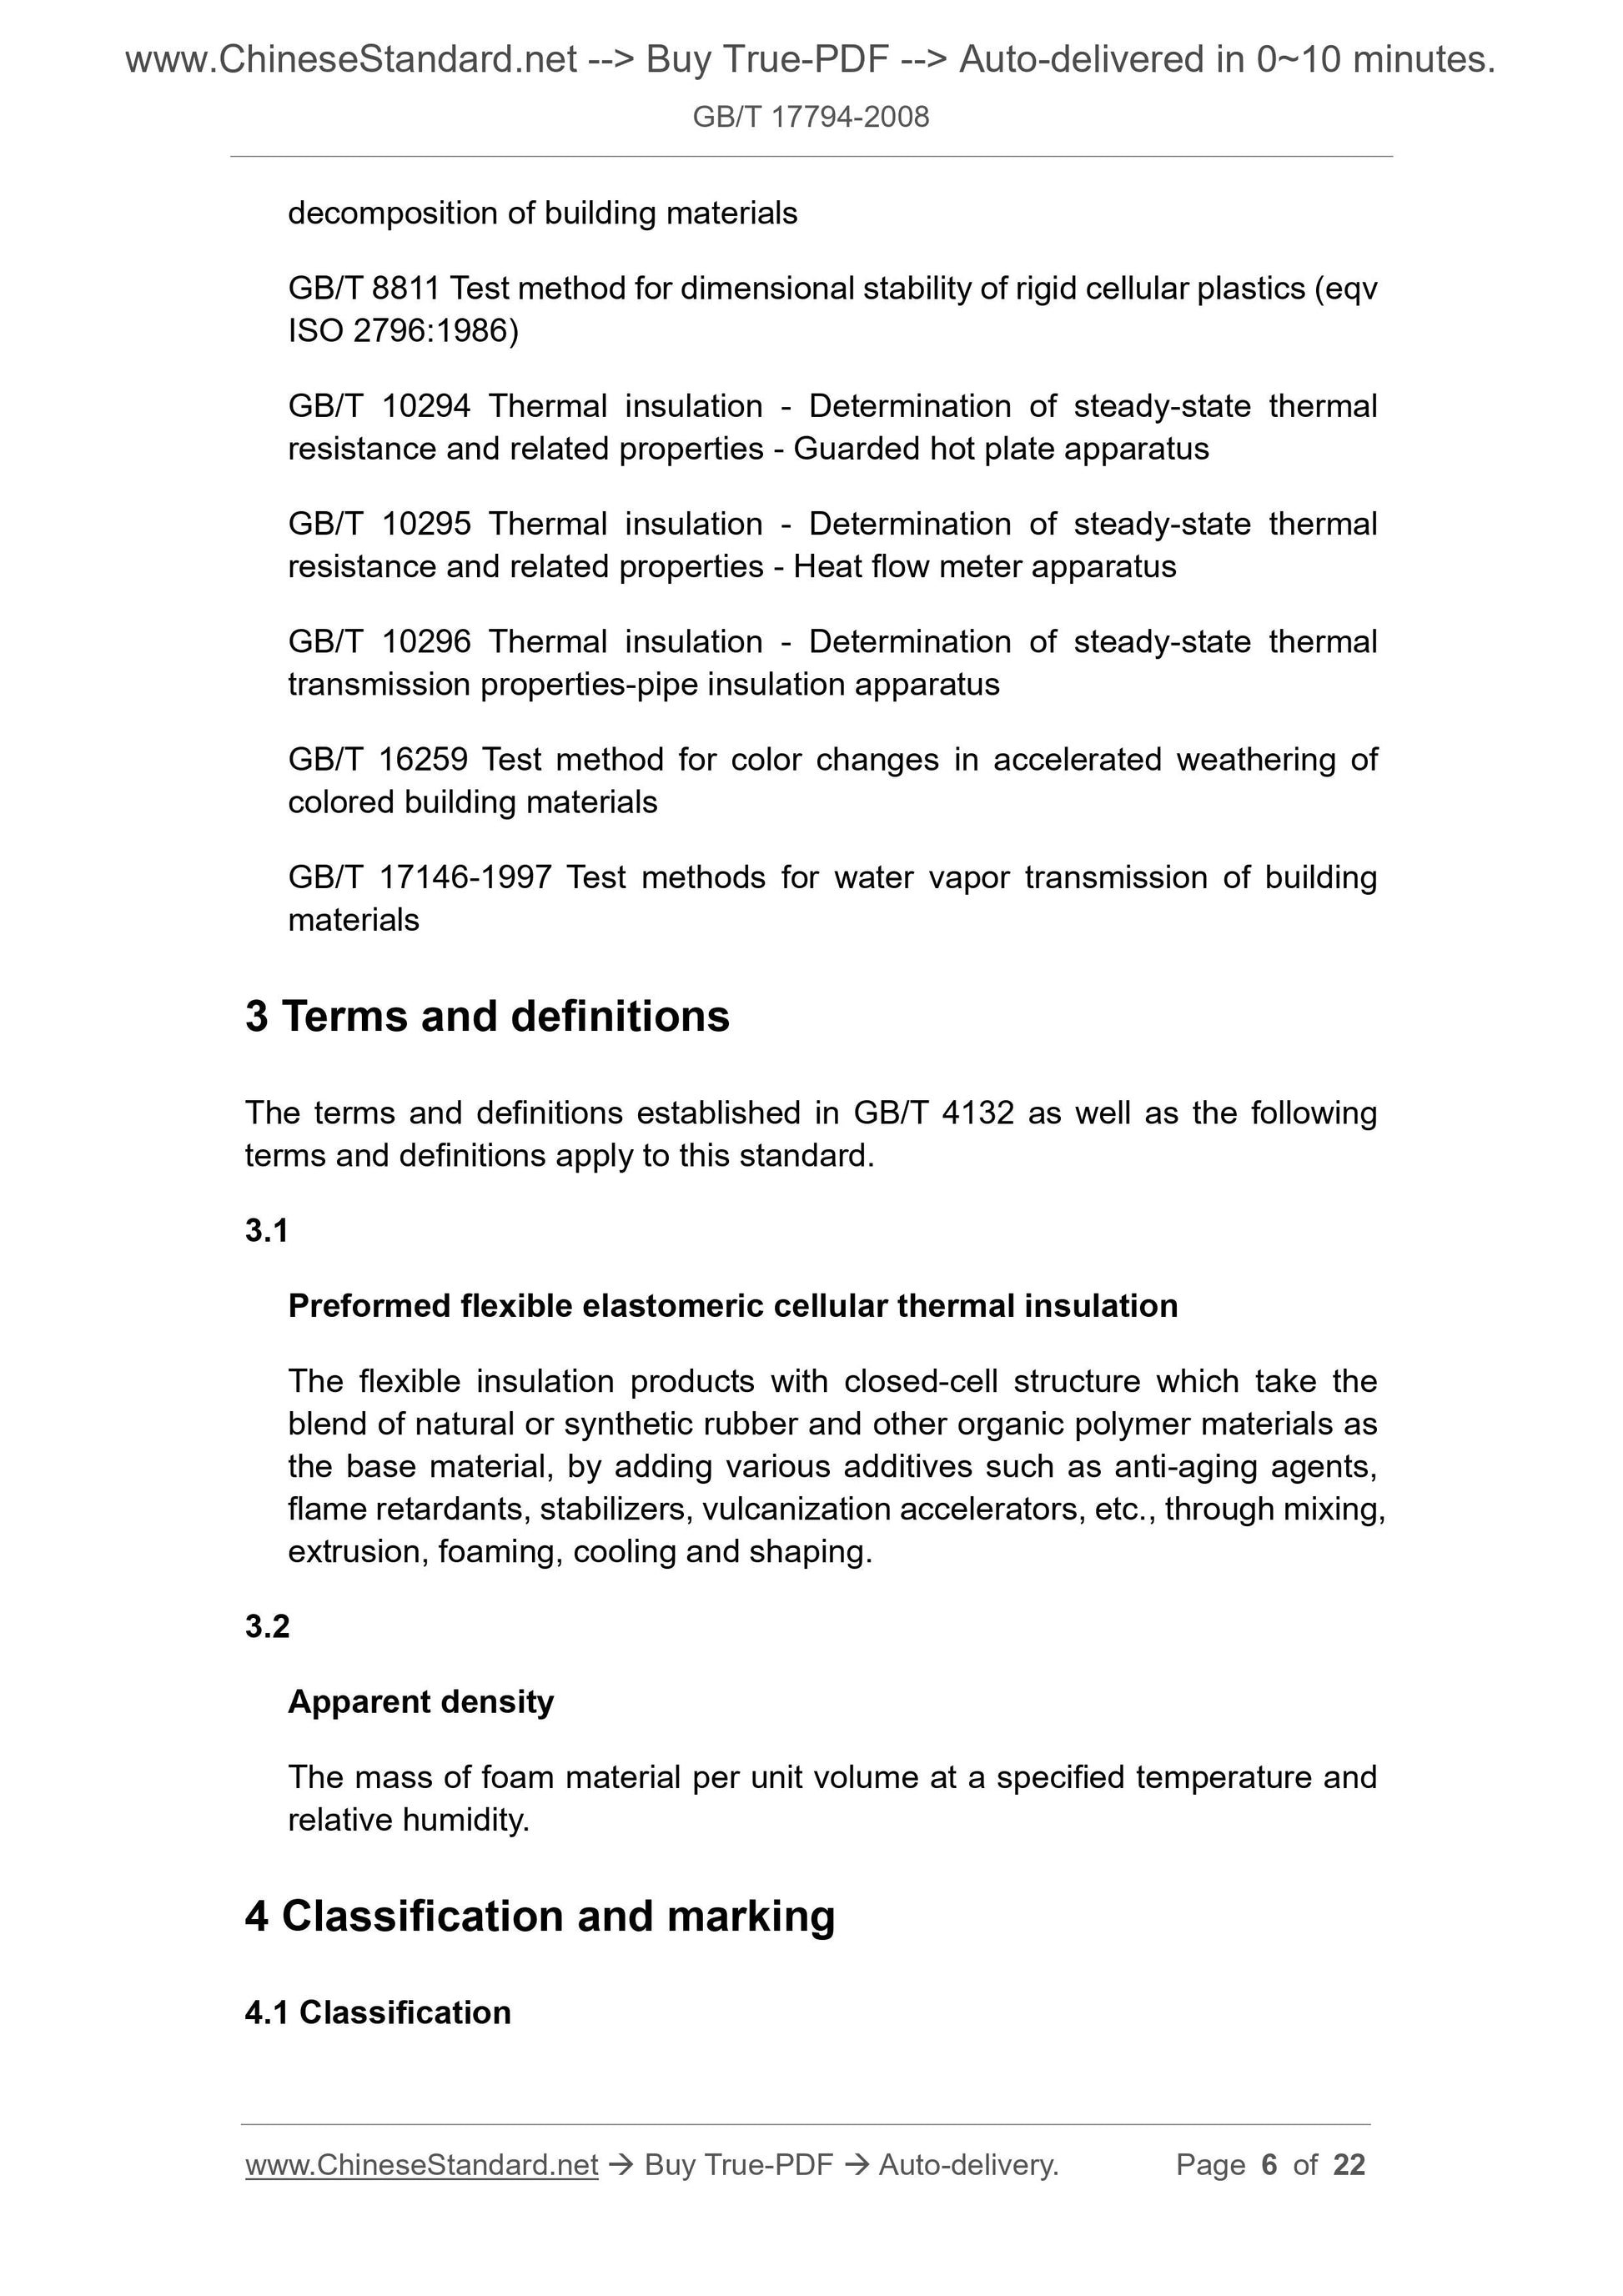 GB/T 17794-2008 Page 4